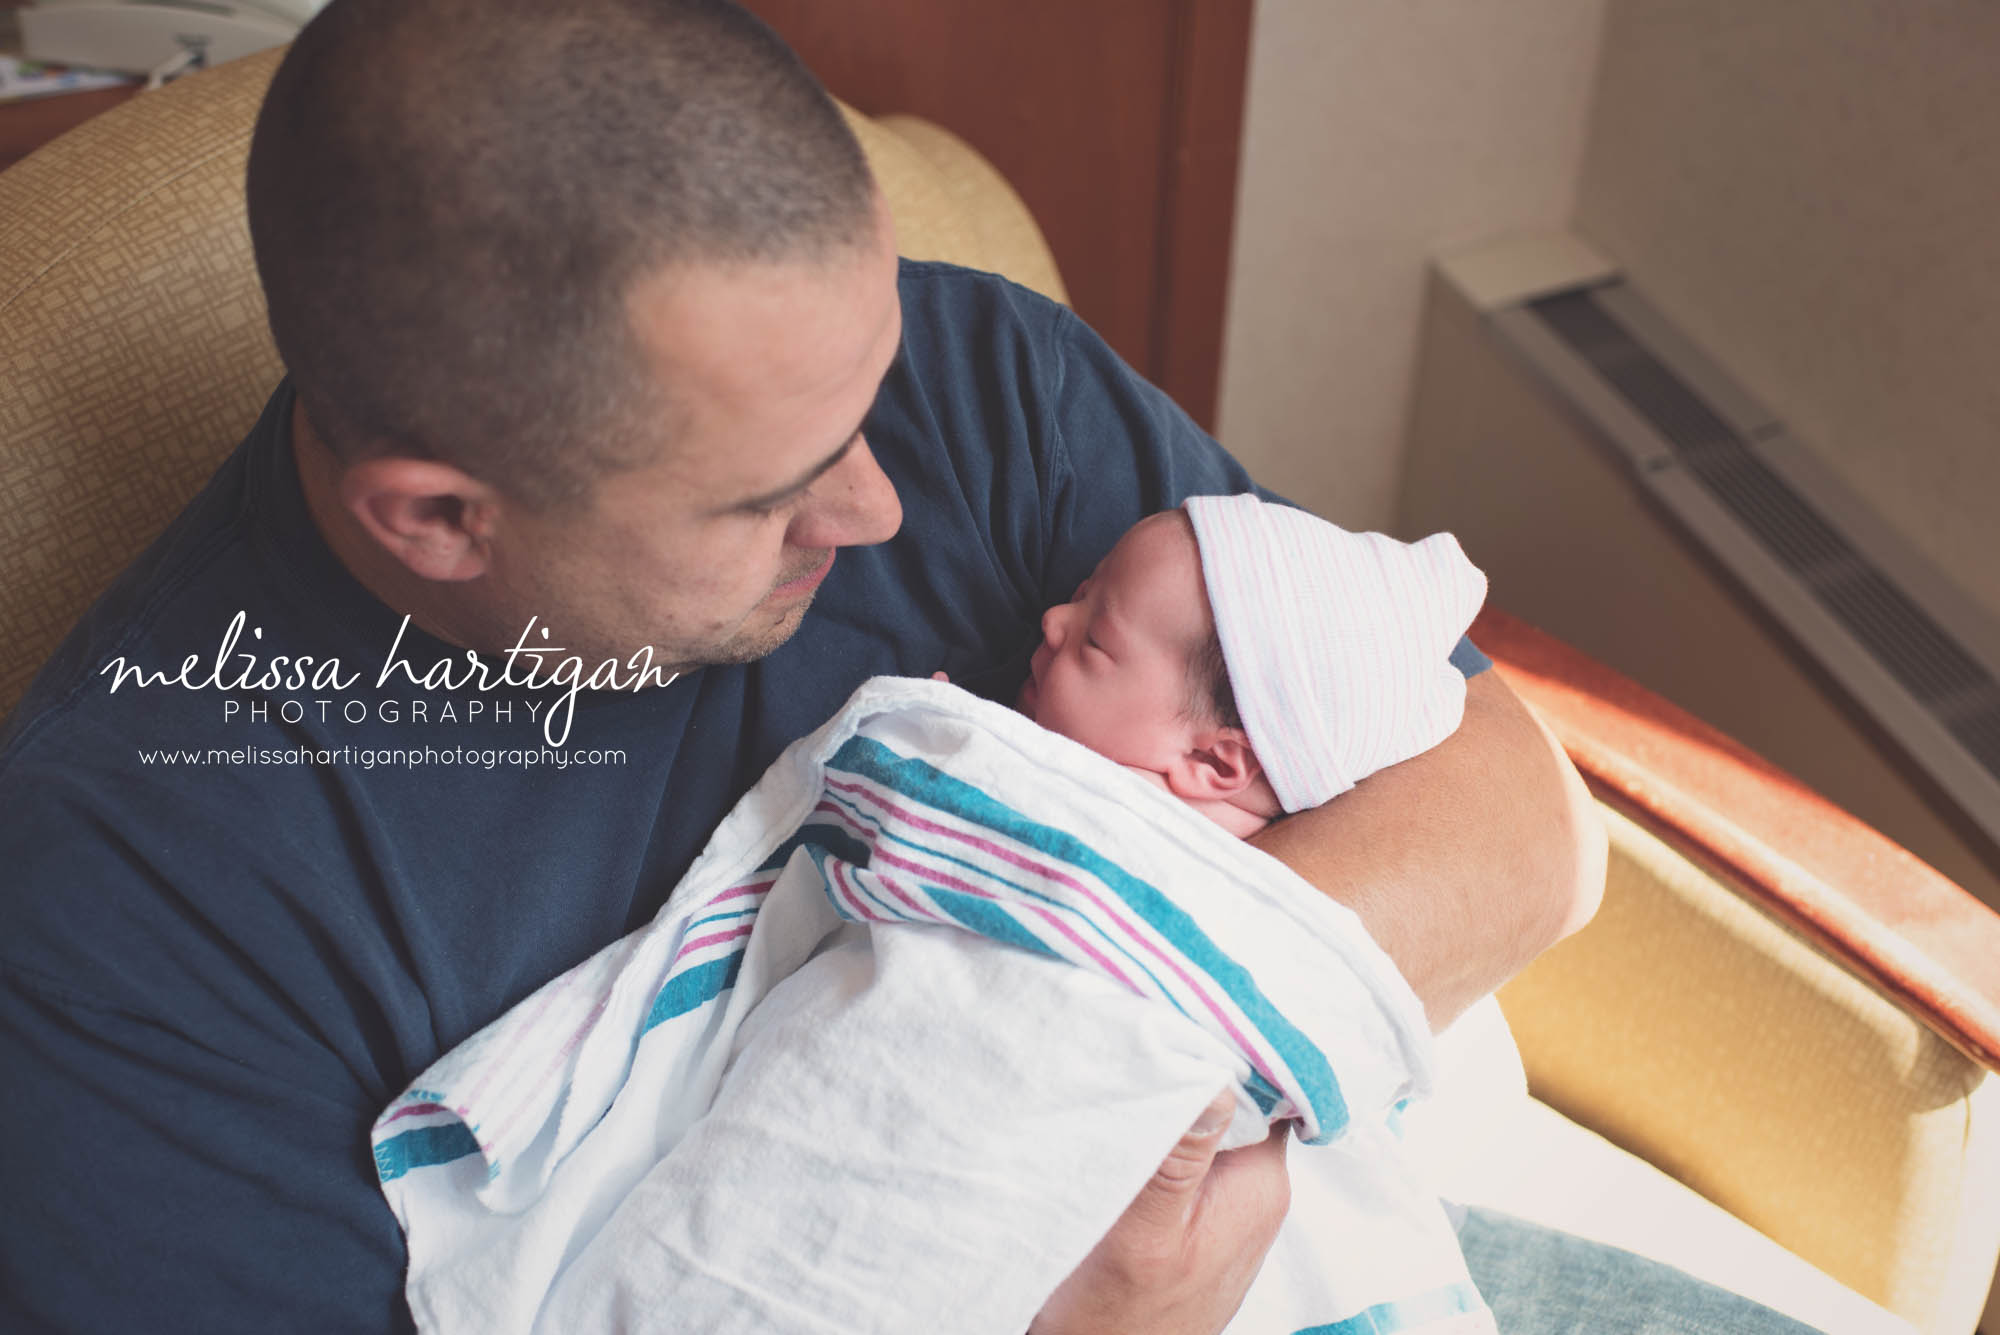 Melissa Hartigan Photography Connecticut Maternity and Newborn Photographer Piper Fresh 48 Newborn Session dad holding baby swaddled in arms